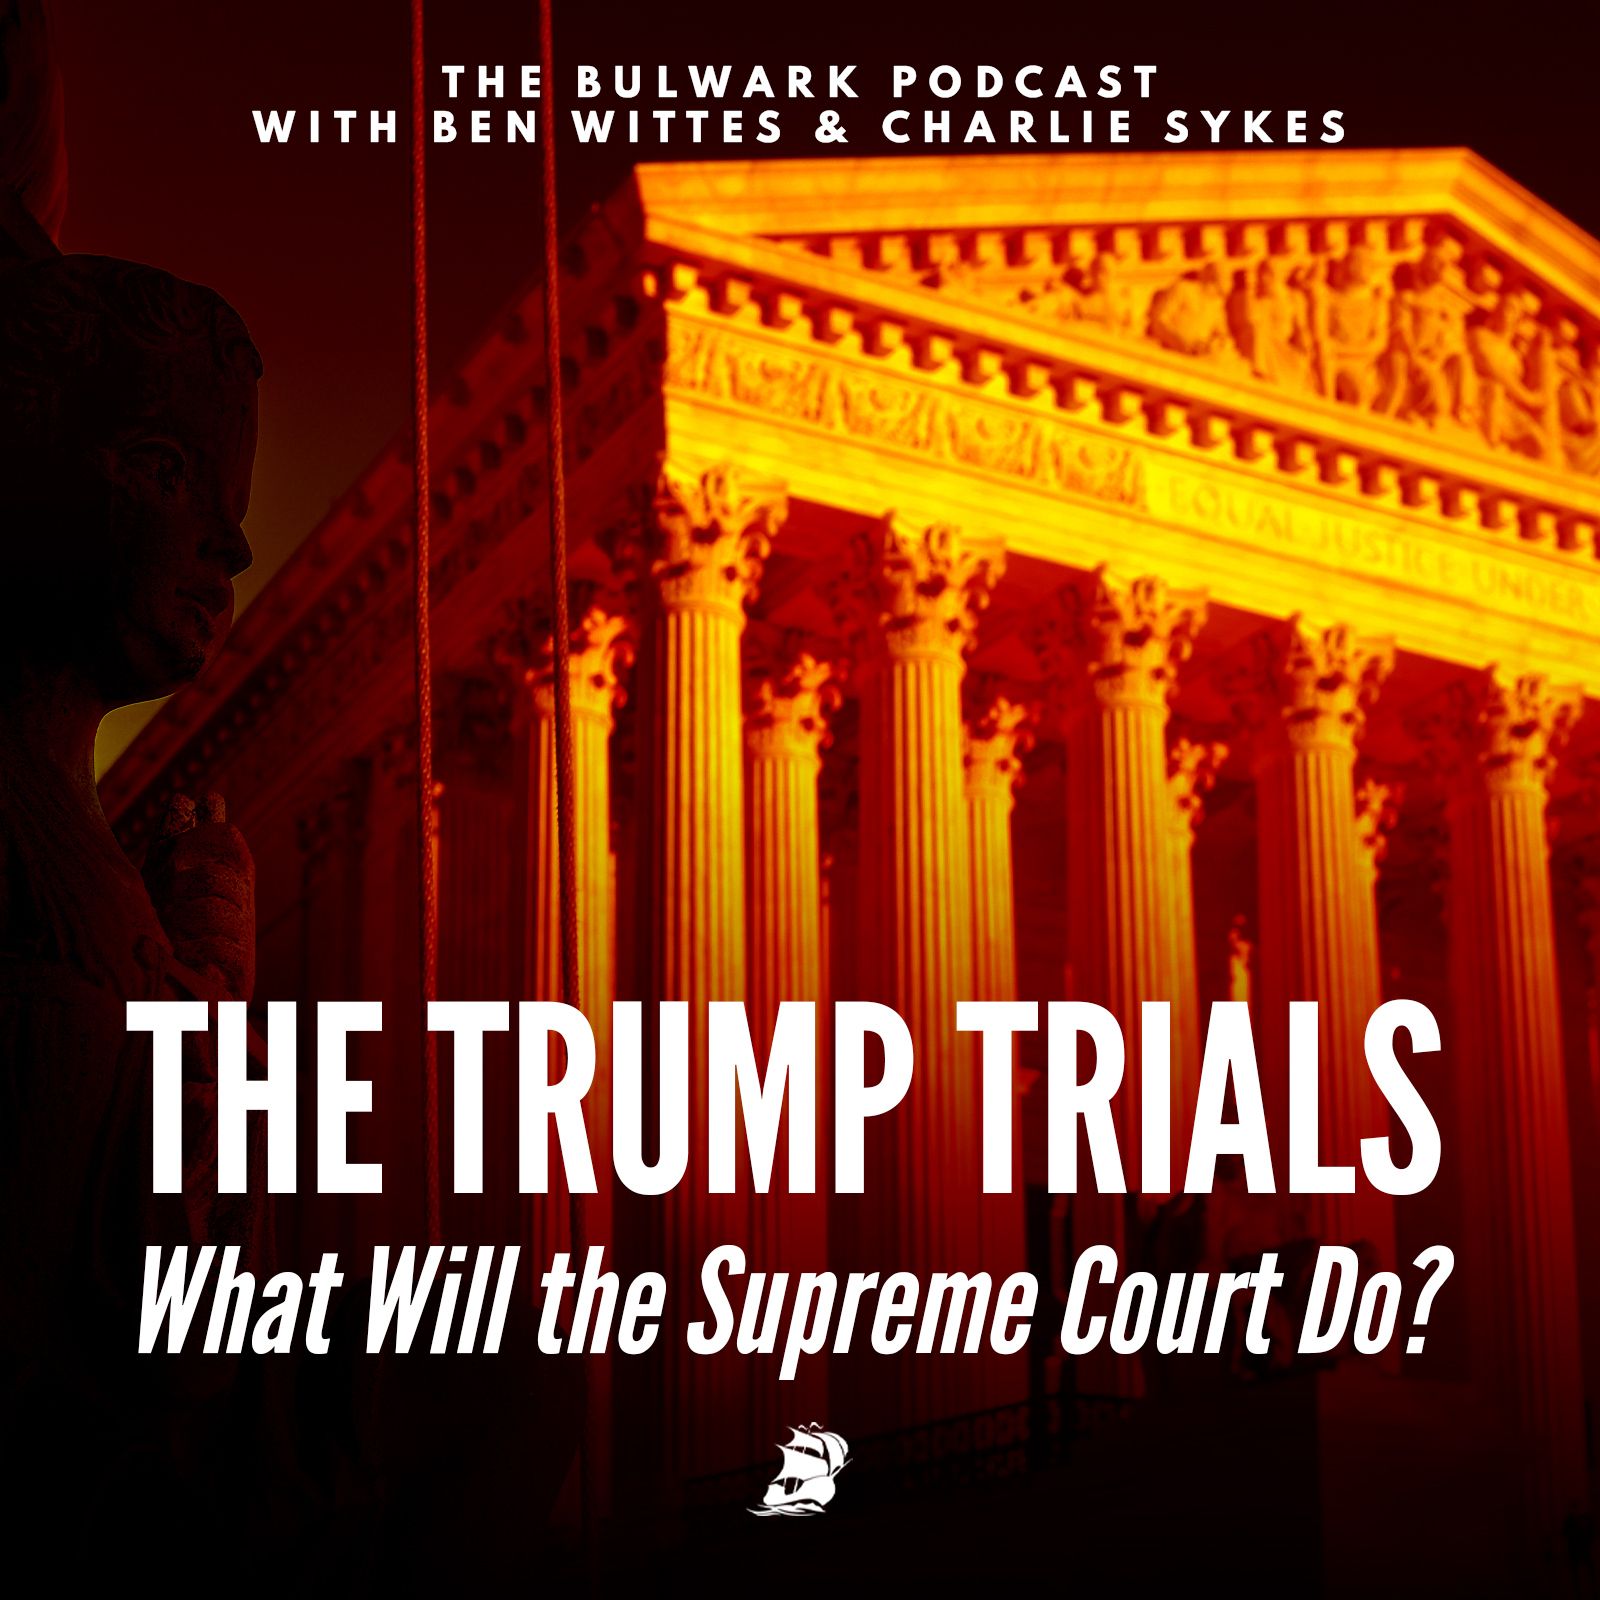 What Will the Supreme Court Do? by The Bulwark Podcast